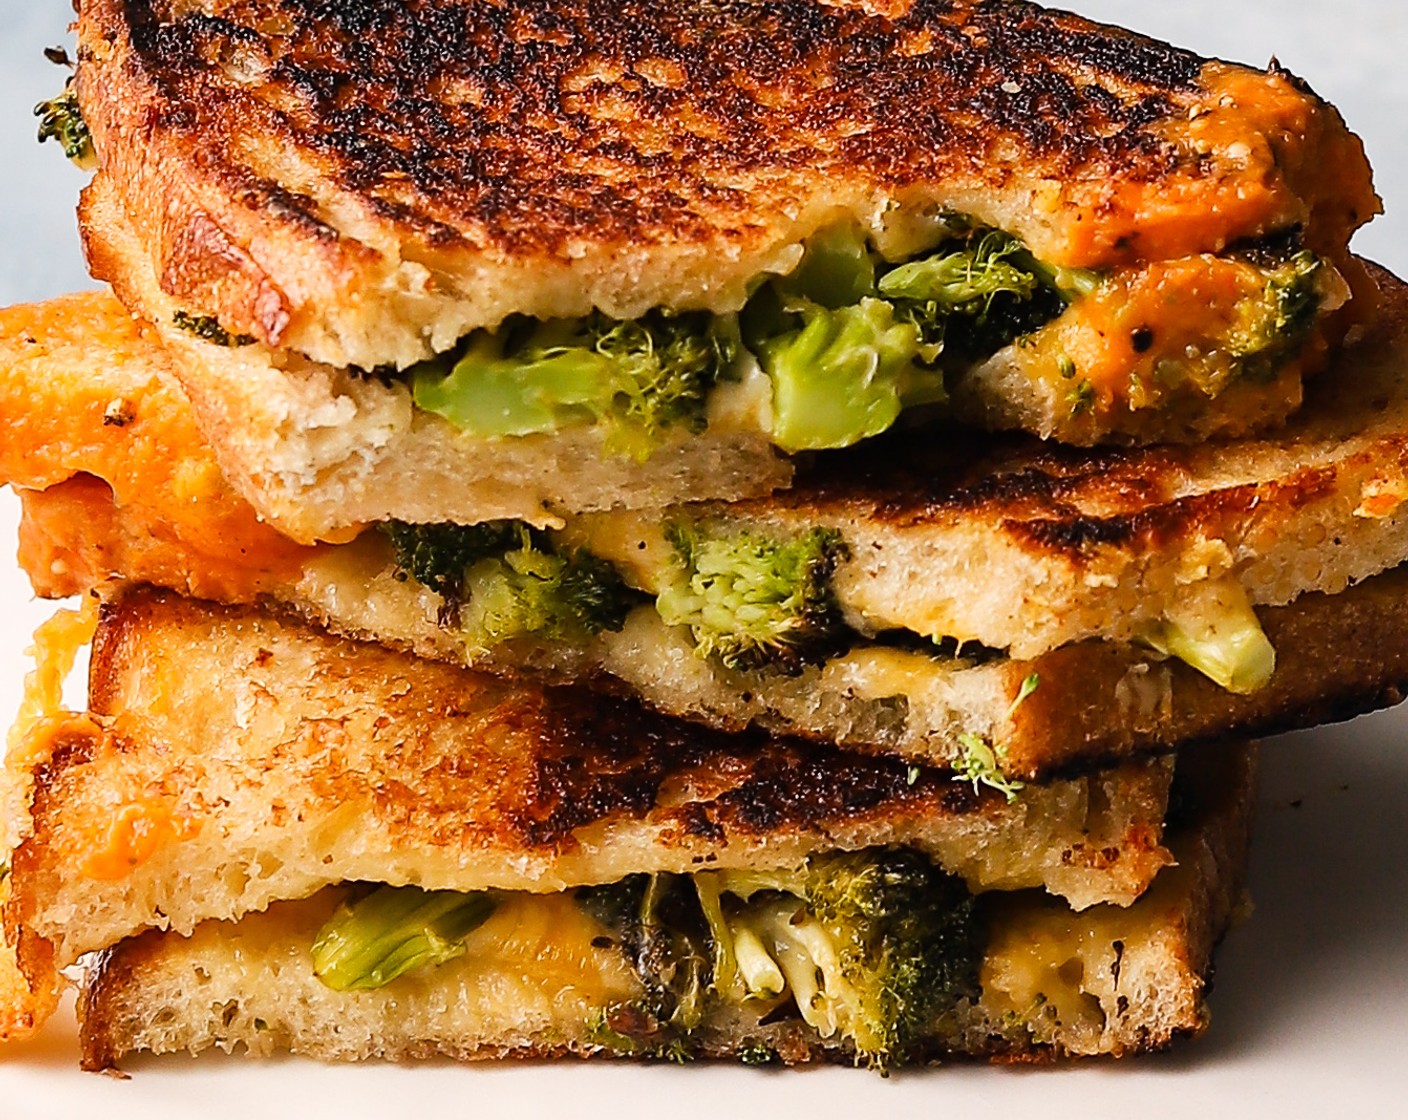 Broccoli Cheddar Grilled Cheese Melts